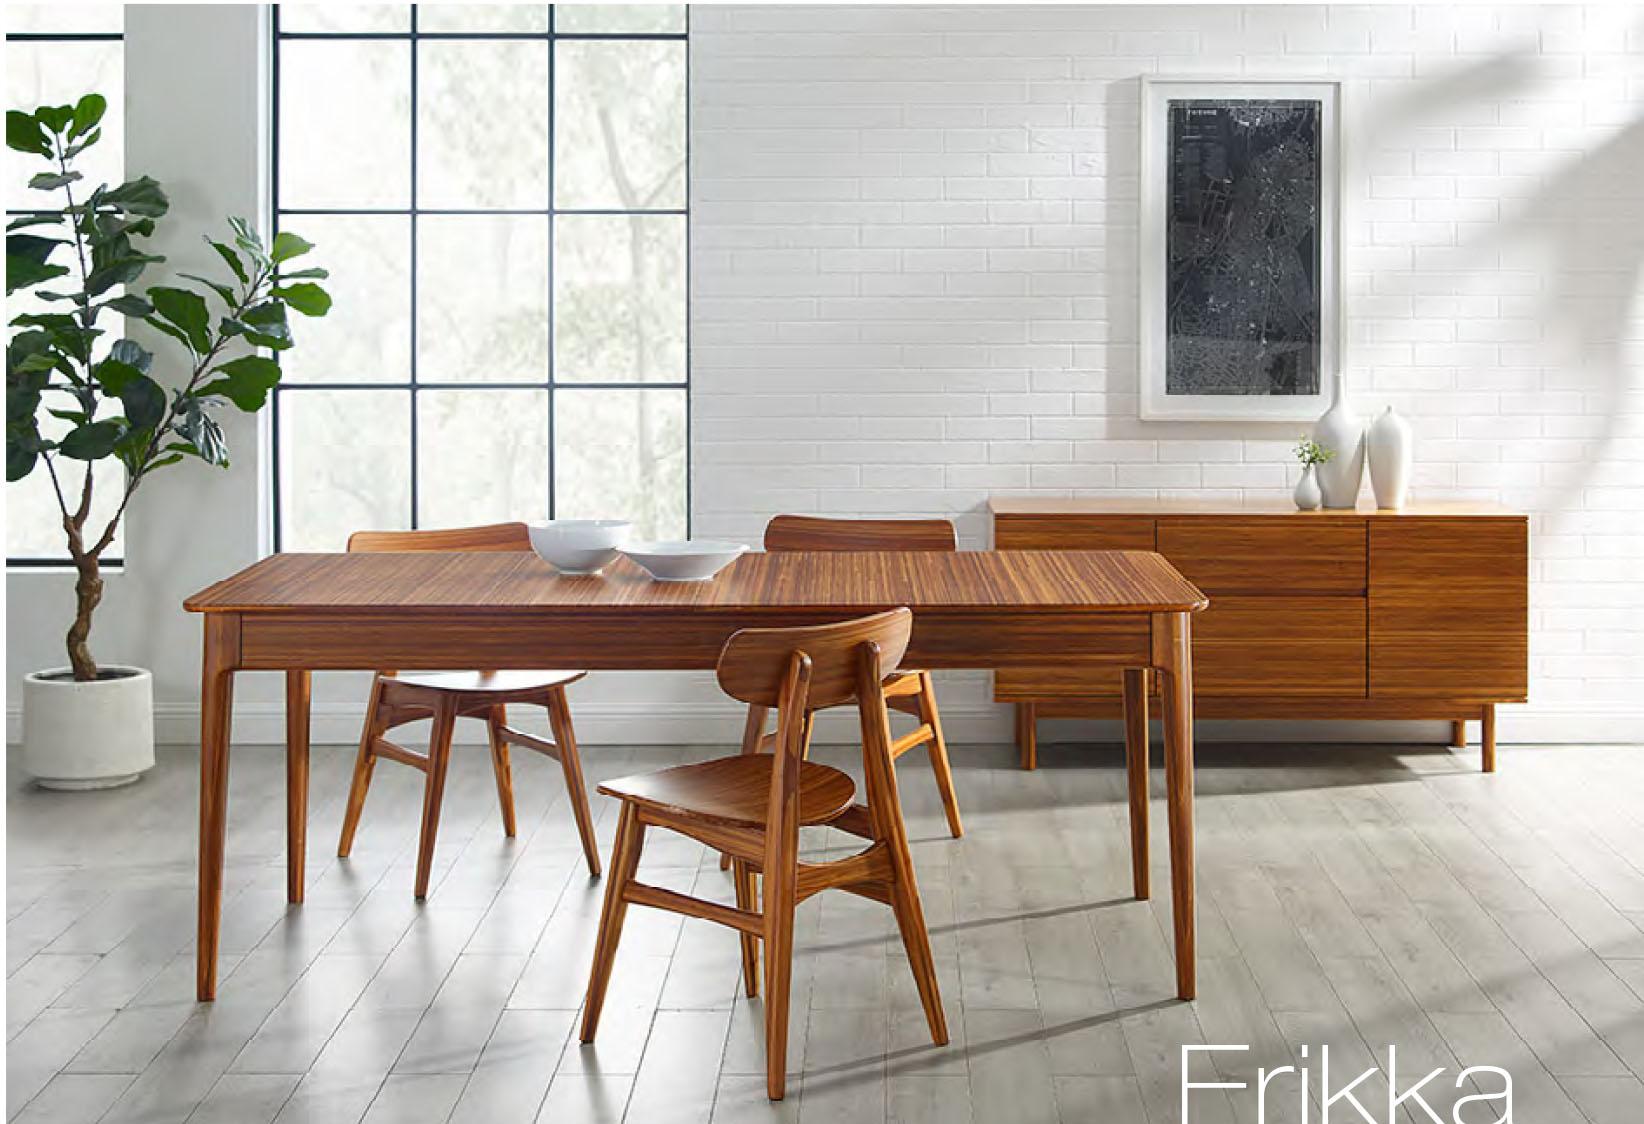 

    
Bamboo Double Butterfly-leave Extension Dining Table 78 - 110” Amber Erikka by Greenington
